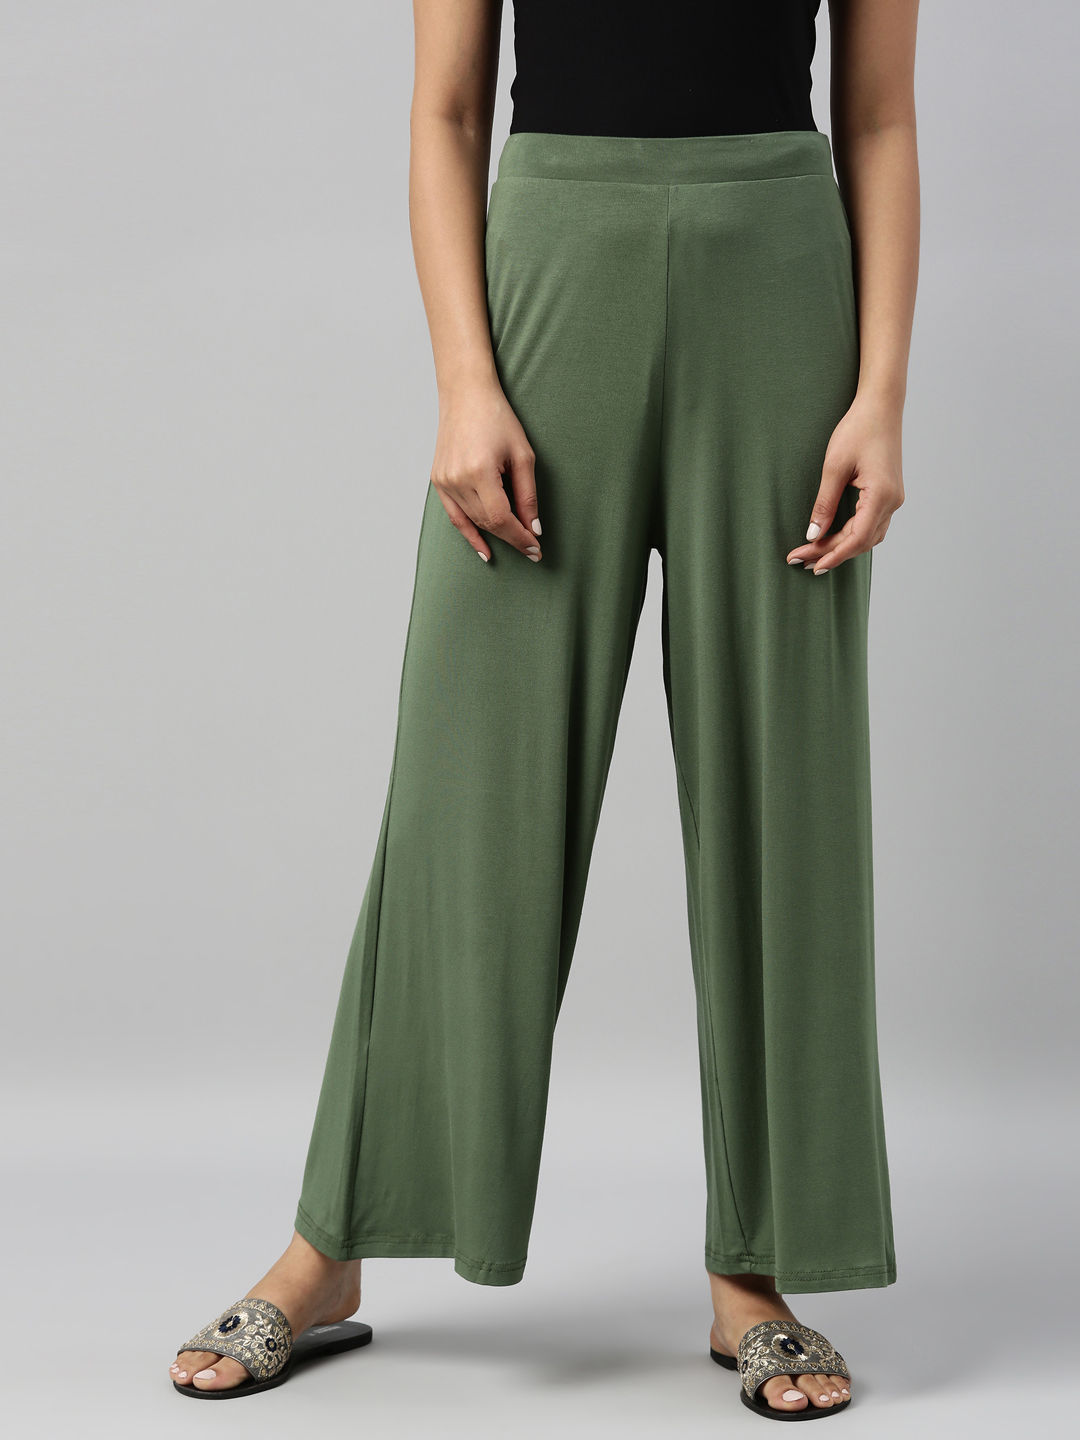 Buy Olive Green Trousers & Pants for Women by Oxolloxo Online | Ajio.com